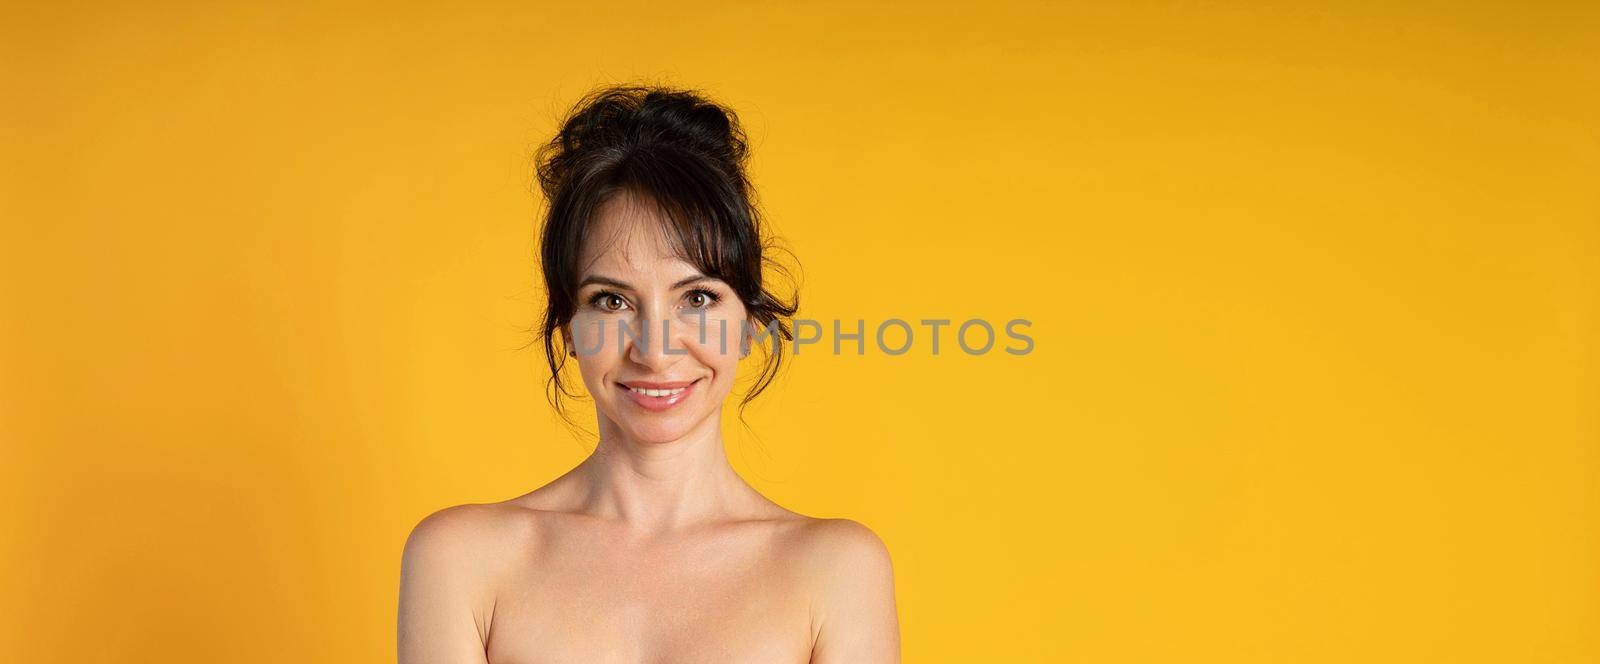 Smiling beautiful middle-aged woman on a yellow background in the studio